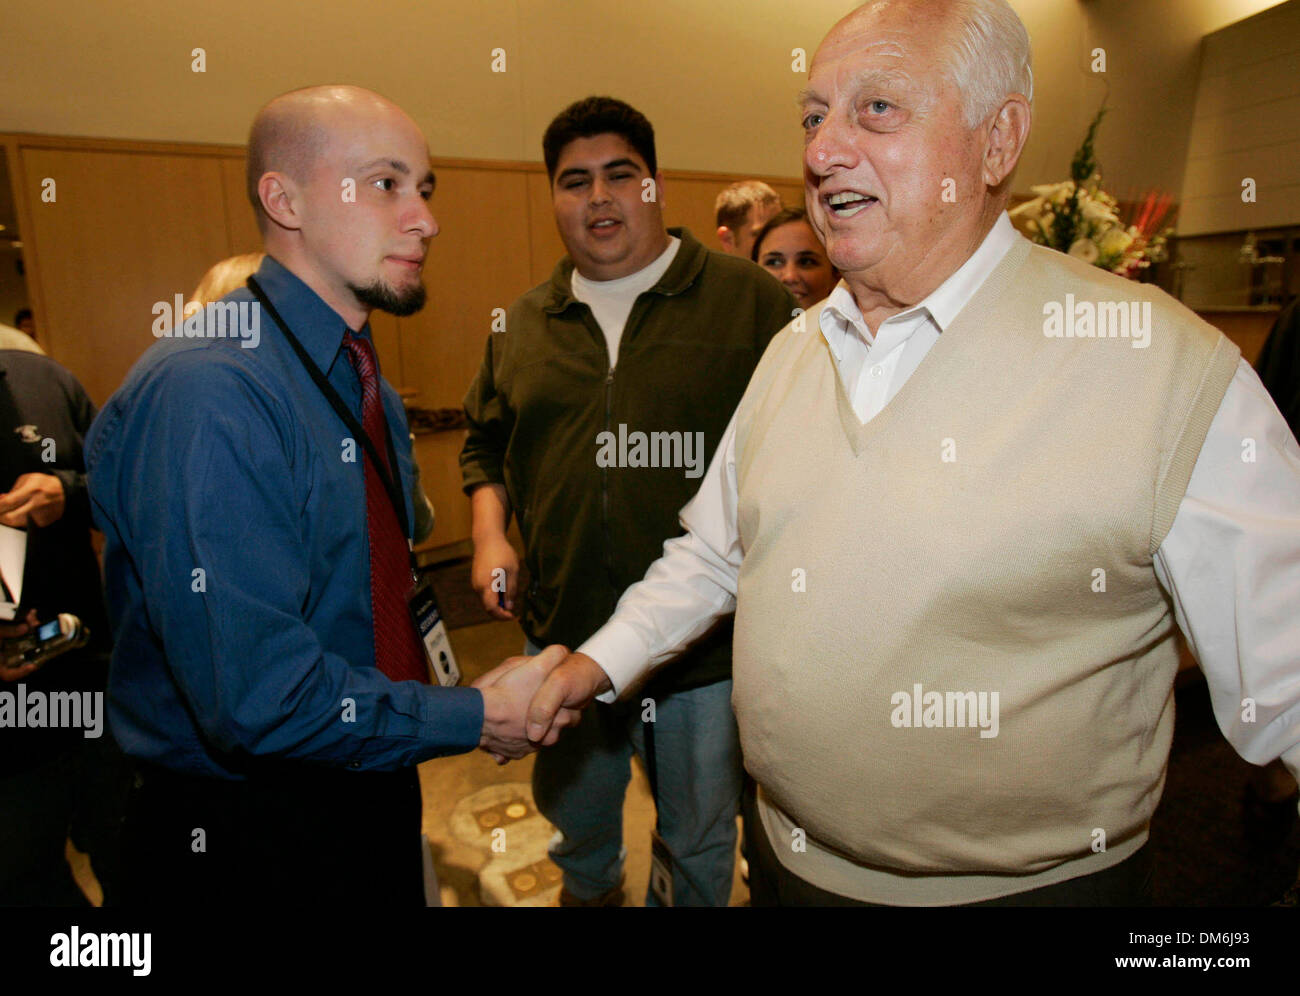 May 12, 2005; Los Angeles, CA, USA; Former Los Angeles Dodgers manager TOMMY LASORDA meets students during a Sports Journalism Workshop at the Los Angeles Dodgers Stadium. Mandatory Credit: Photo by Ringo H.W. Chiu/ZUMA Press. (©) Copyright 2005 by Ringo H.W. Chiu Stock Photo